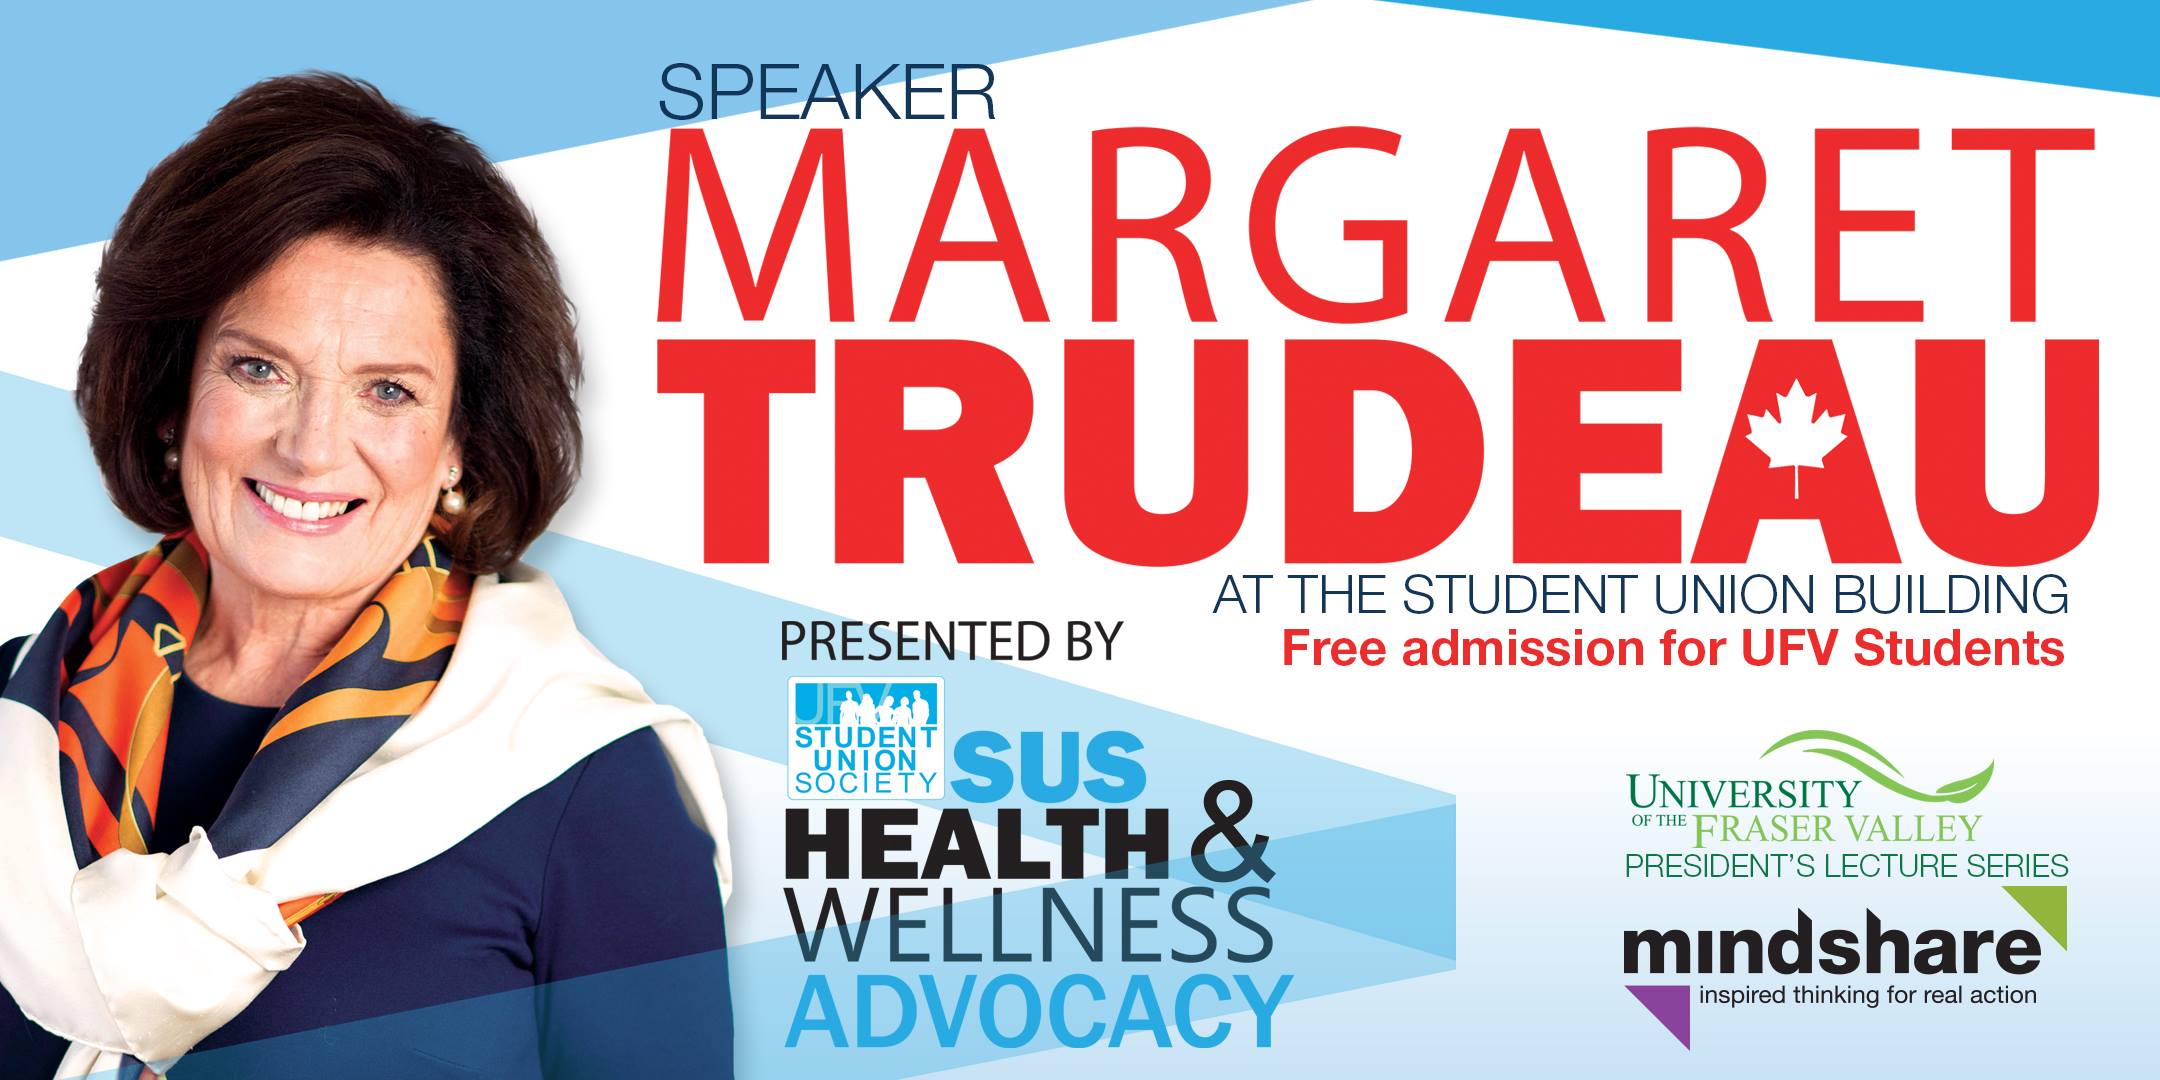 SUS announces Margaret Trudeau as keynote speaker for health and wellness advocacy initiative